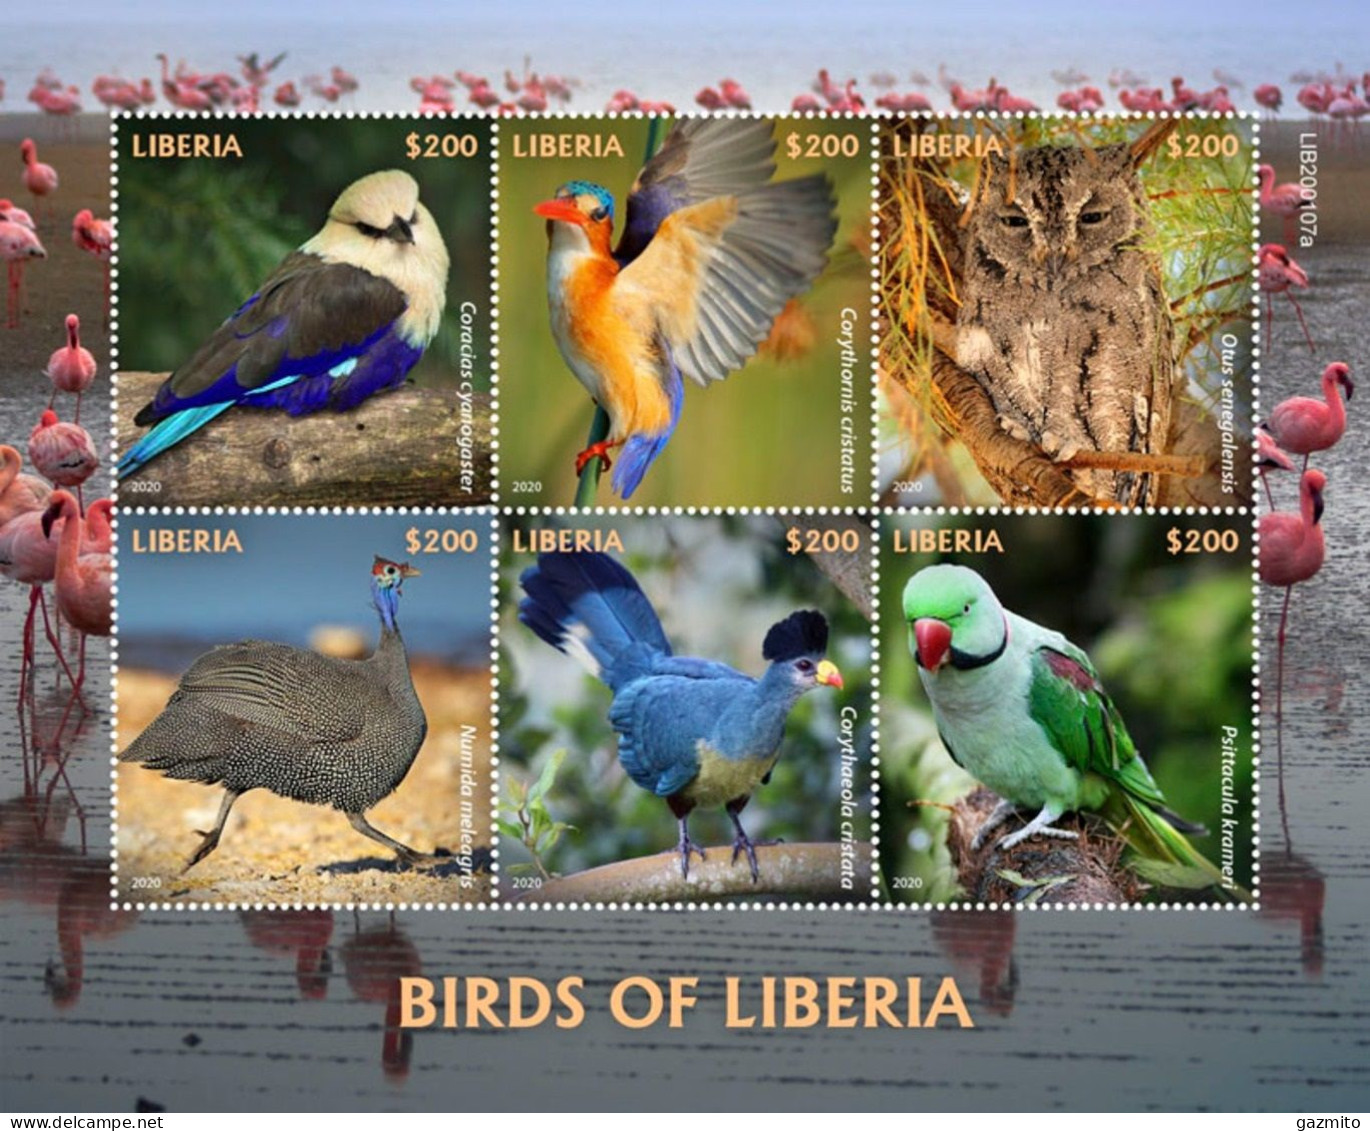 Liberia 2020, Animals, Birds, Kingfisher, Owl, Parrot, Flamingos, 6val In BF - Hiboux & Chouettes